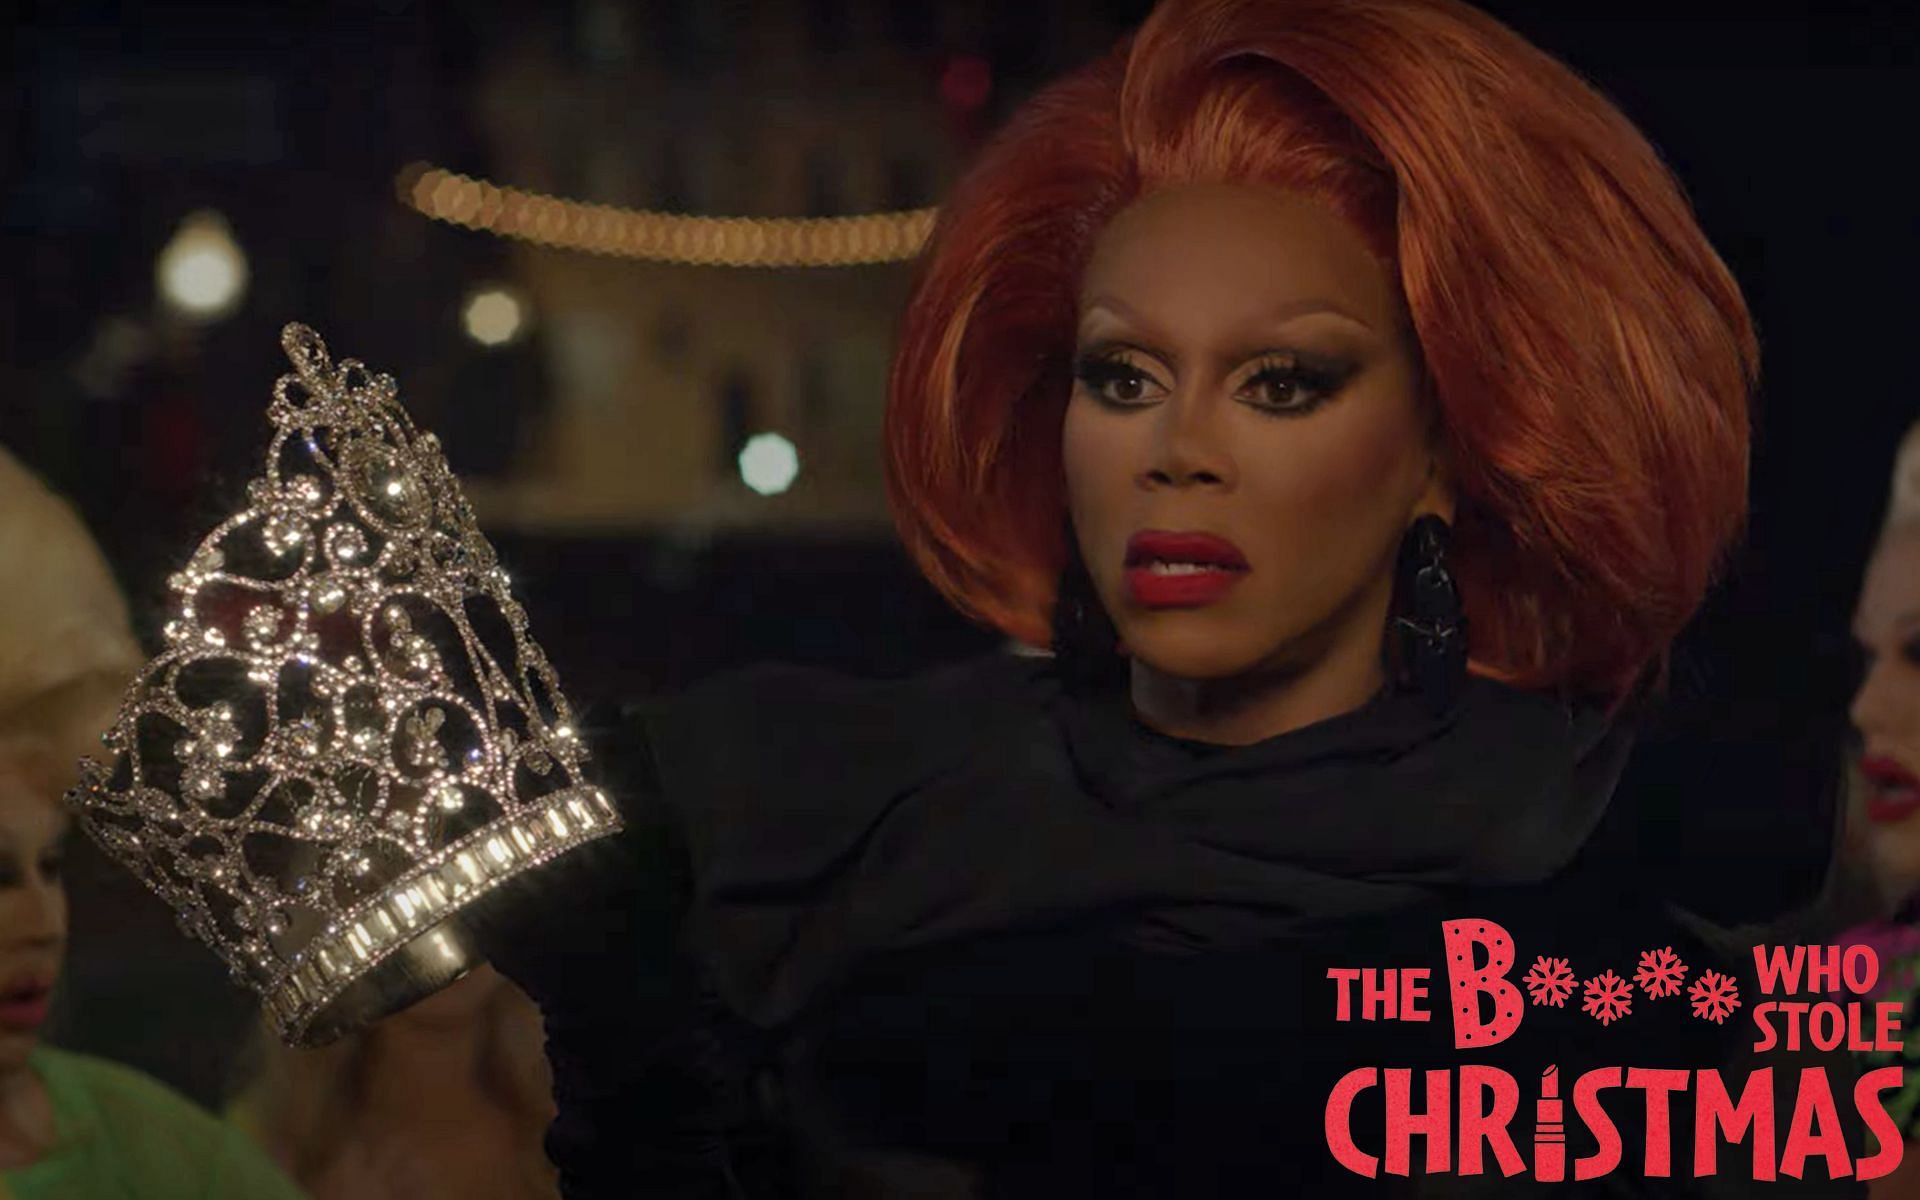 RuPaul in The B*tch Who Stole Christmas (Image via VH1)